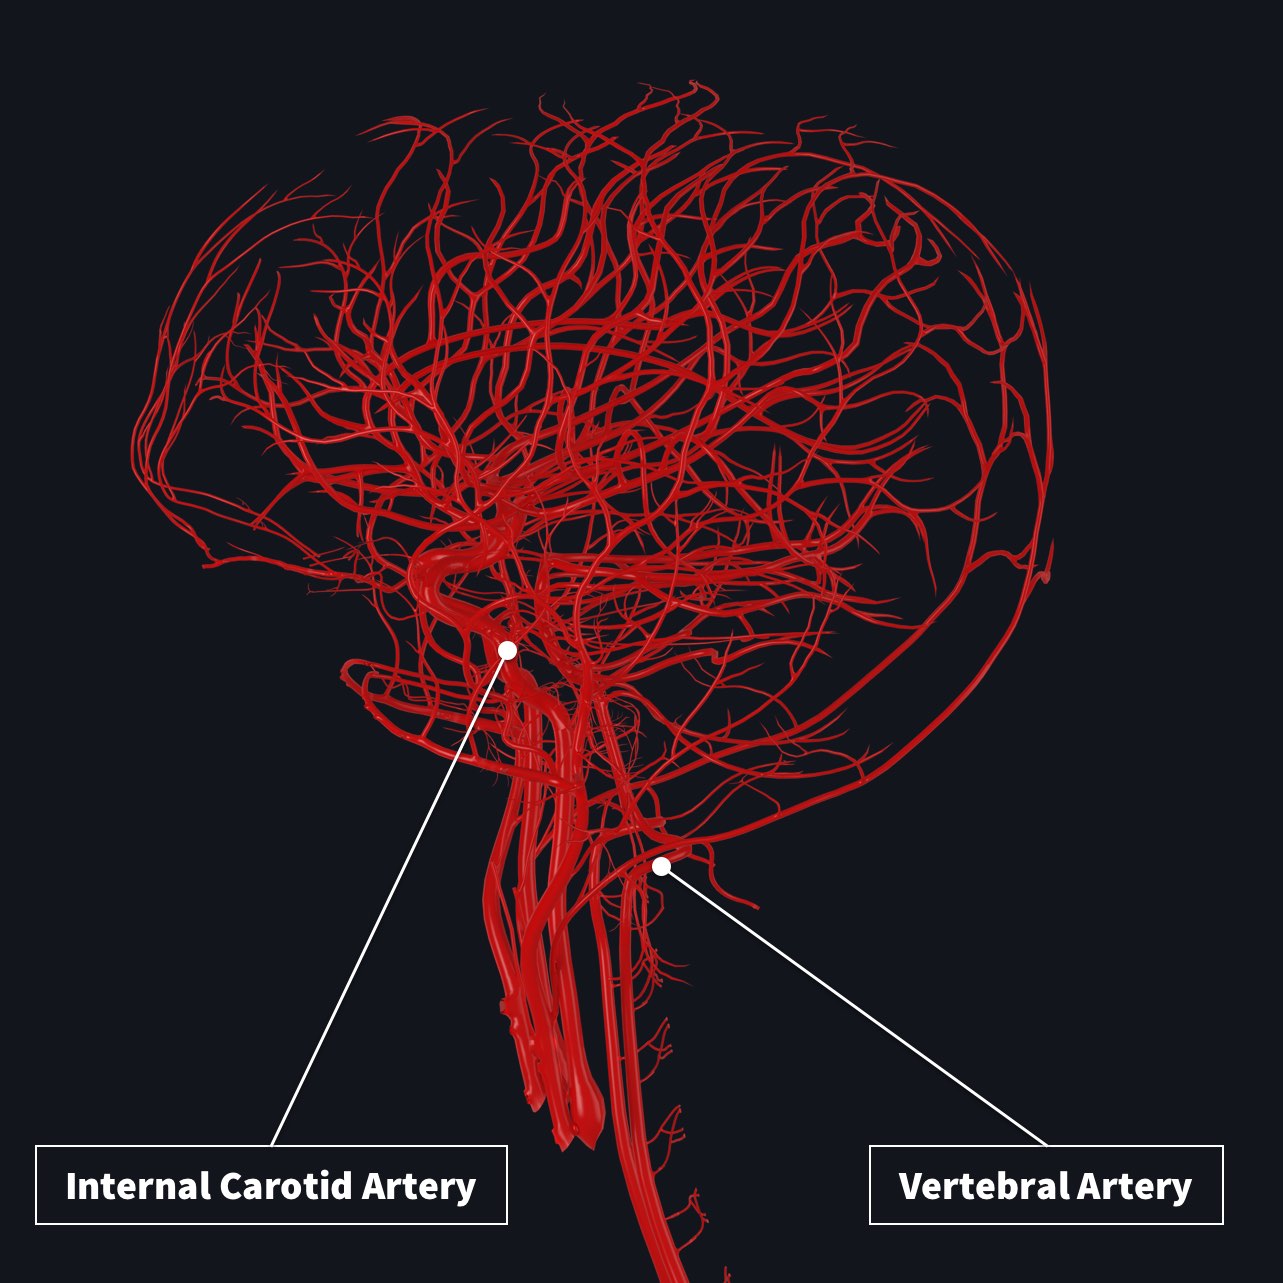 Blood supply to the brain with internal carotid artery and vertebral artery highlighted